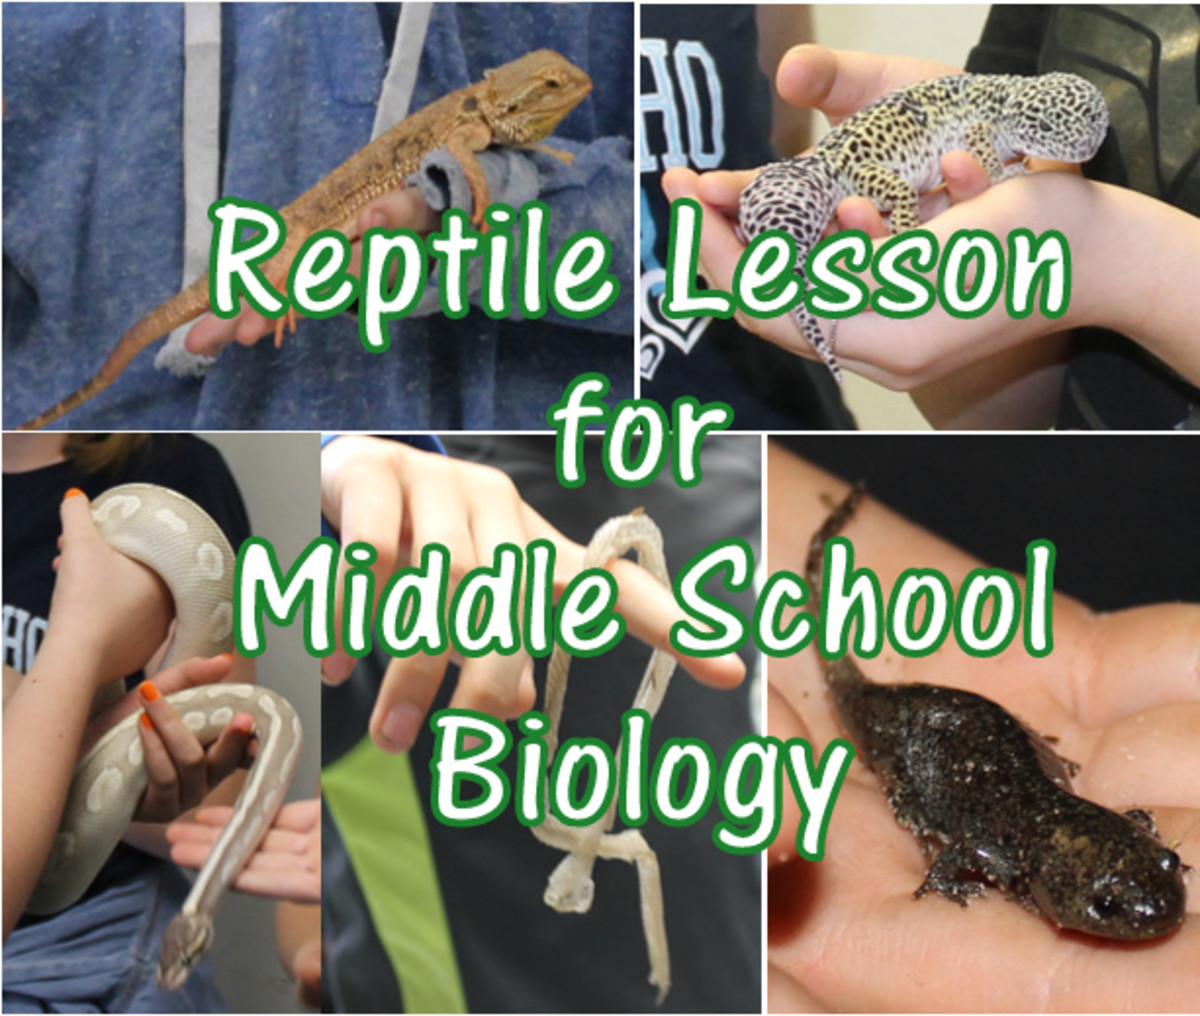 Reptiles Lesson for Middle School Biology